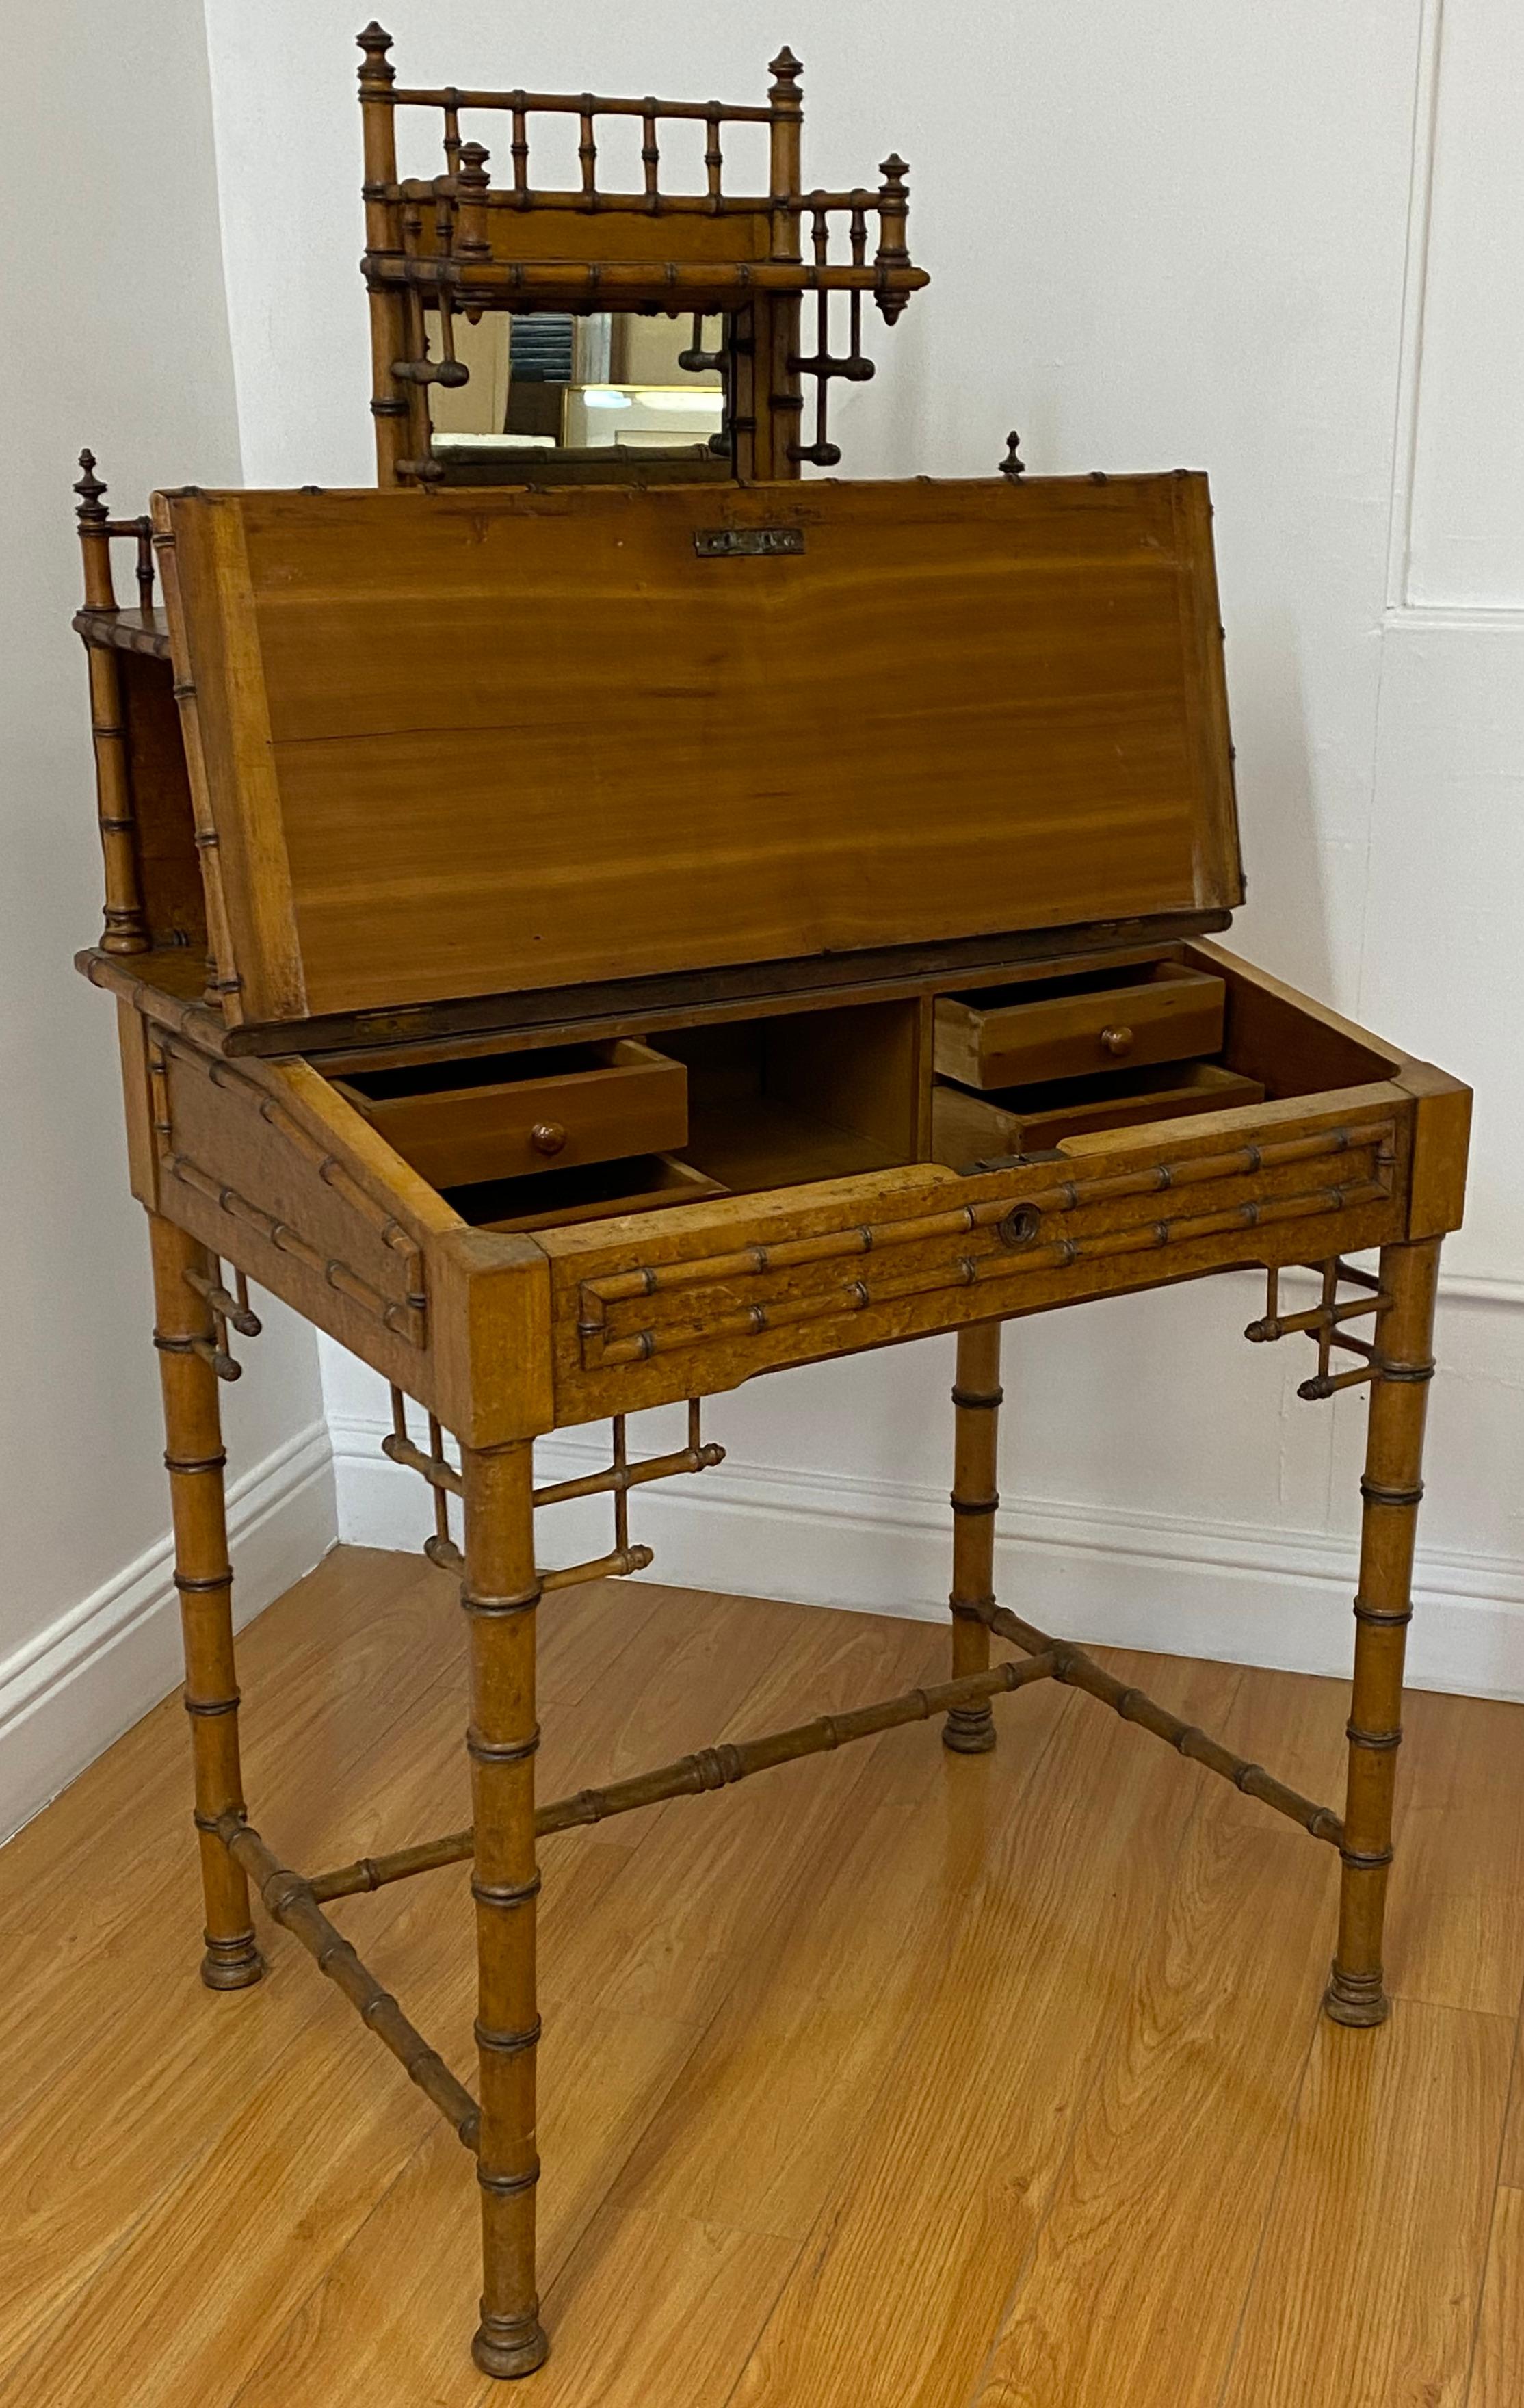 19th century bamboo & leather lift top writing desk

Outstanding antique bamboo writing desk with a lift top, leather surface, various shelves and a mirror.

This 19th century writing desk would make a great 21st century laptop